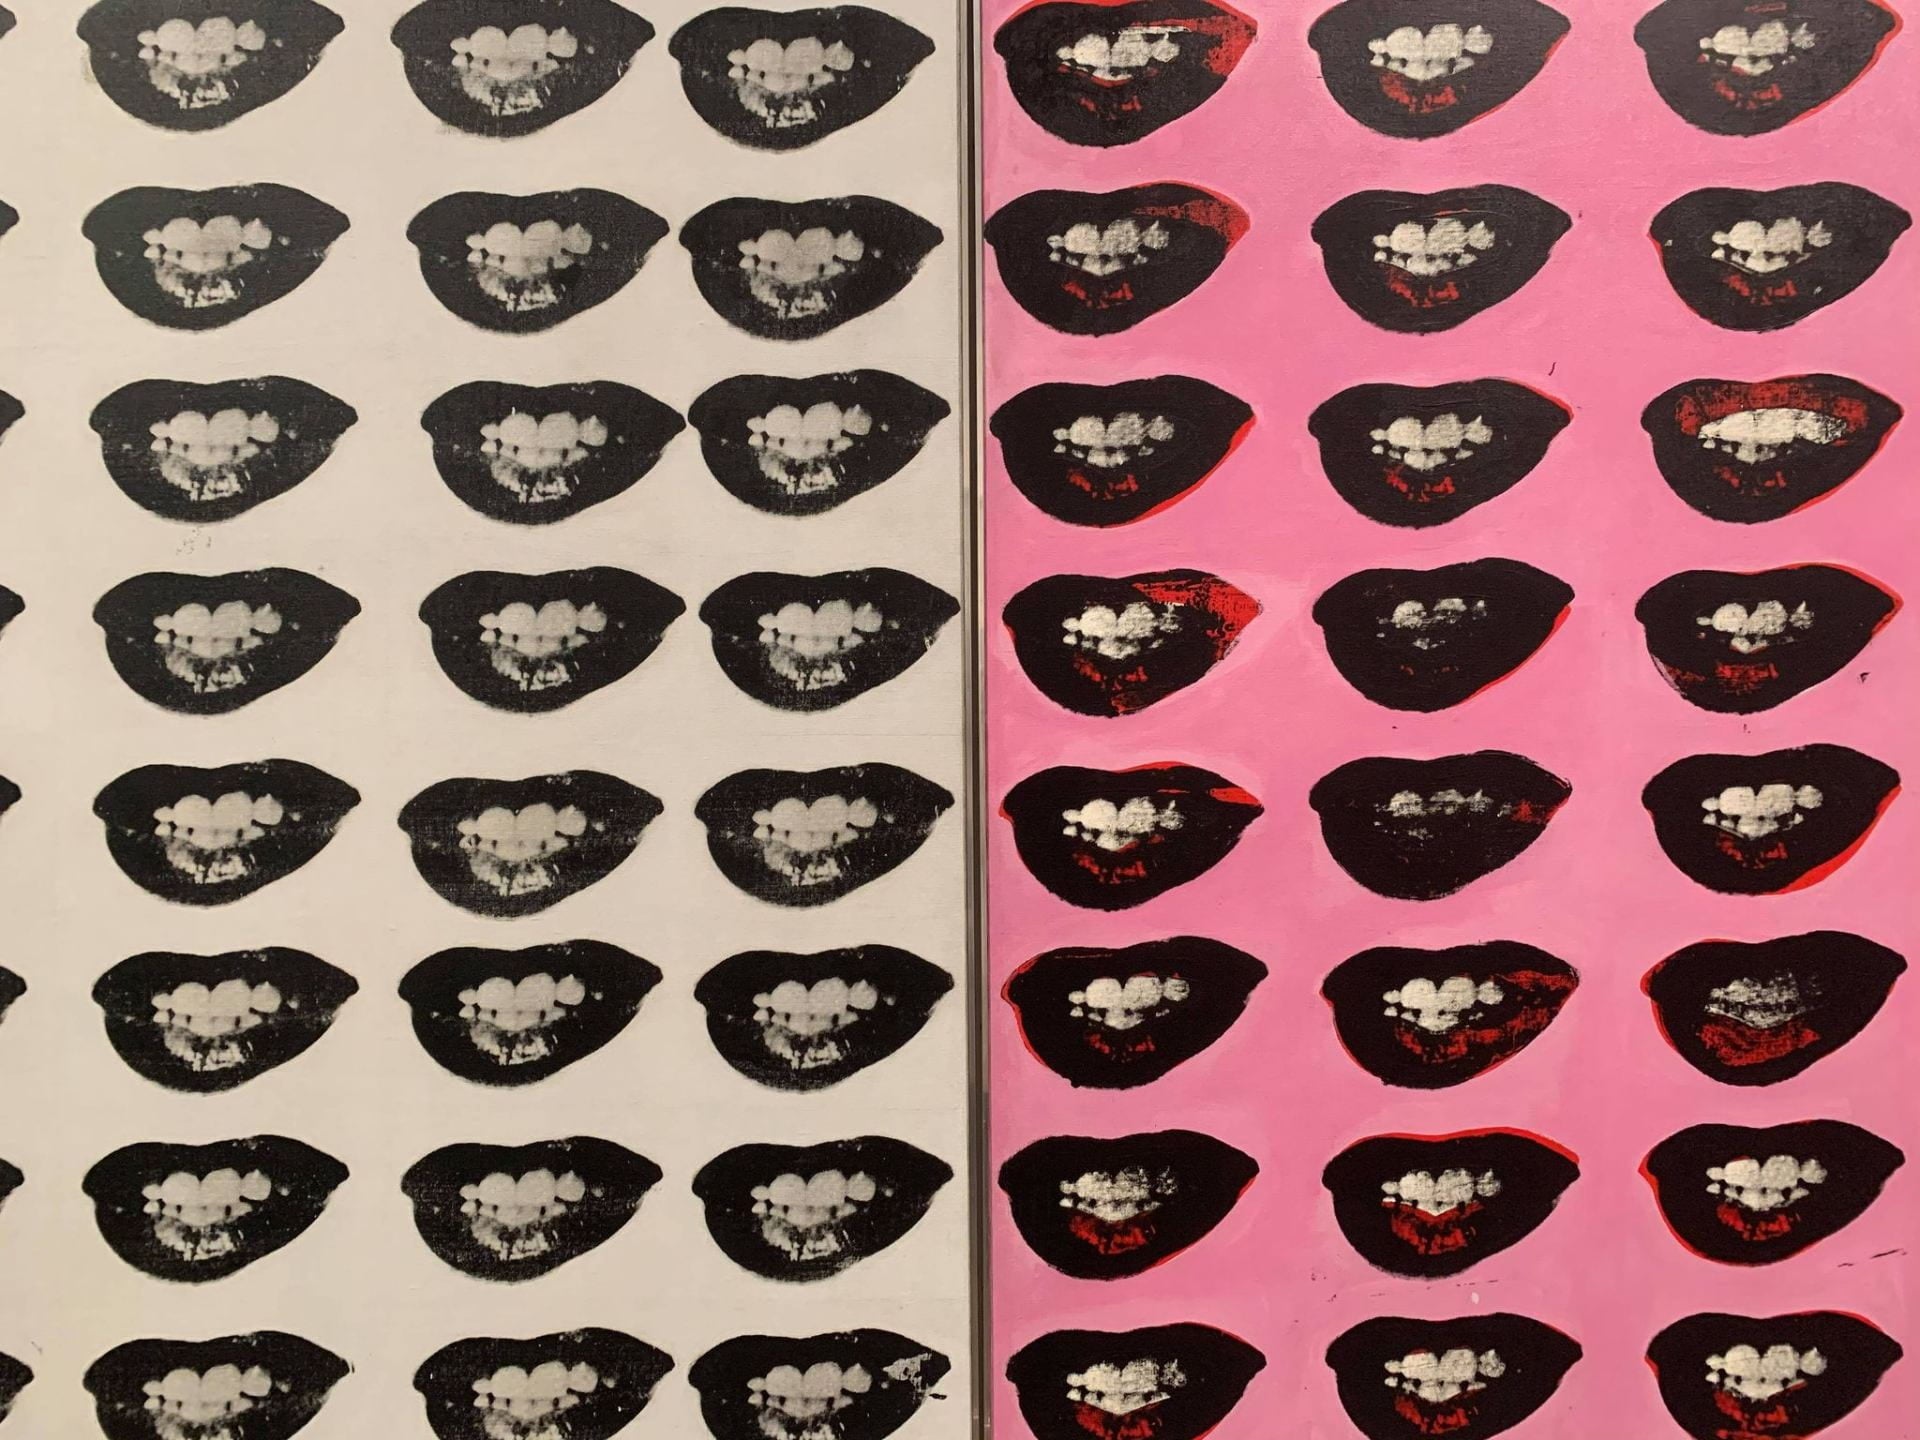 Andy Warhol is famous for repetition in Pop Art pieces